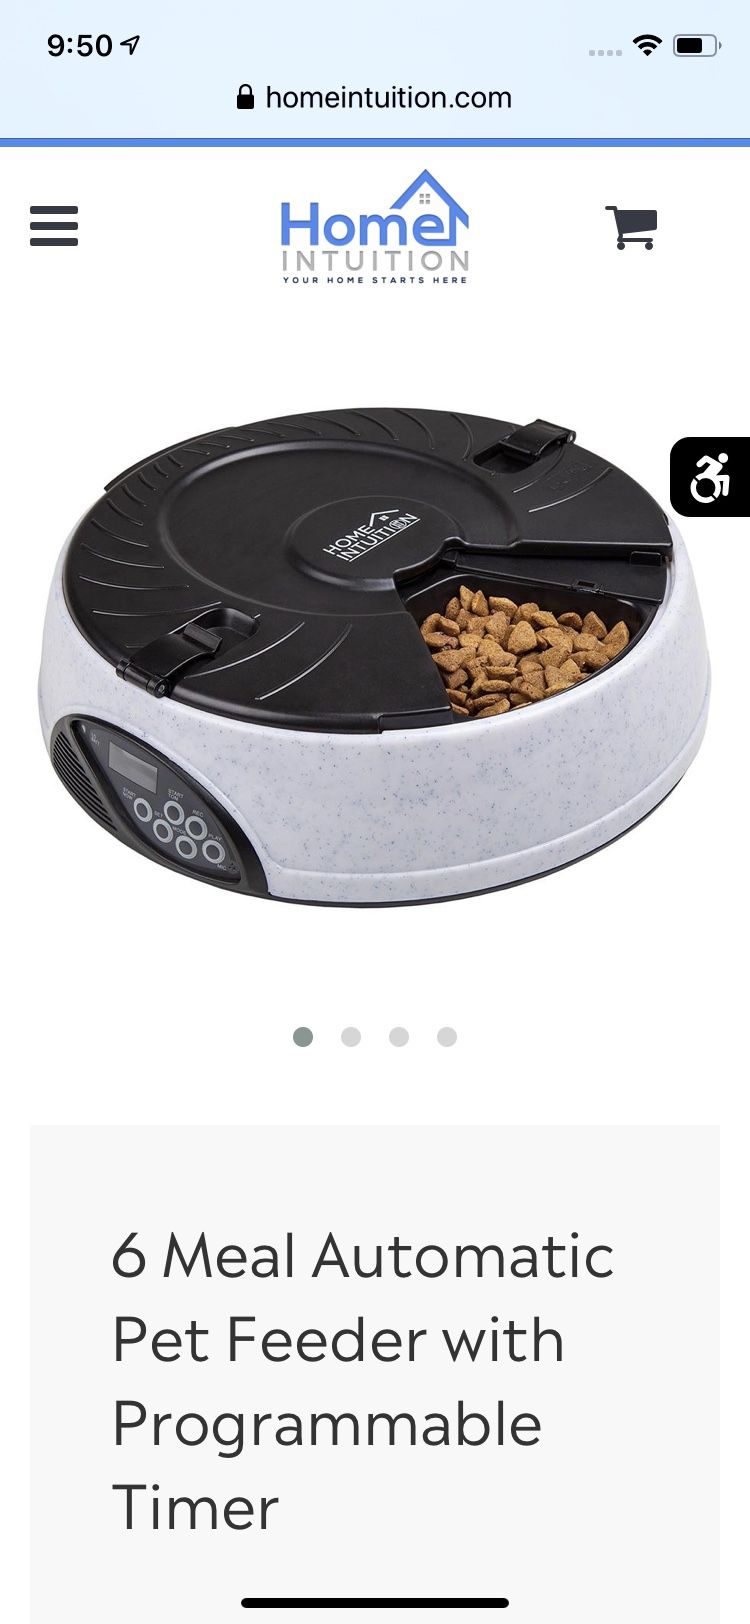 6 trey automatic pet feeder with programmer Clock and timer